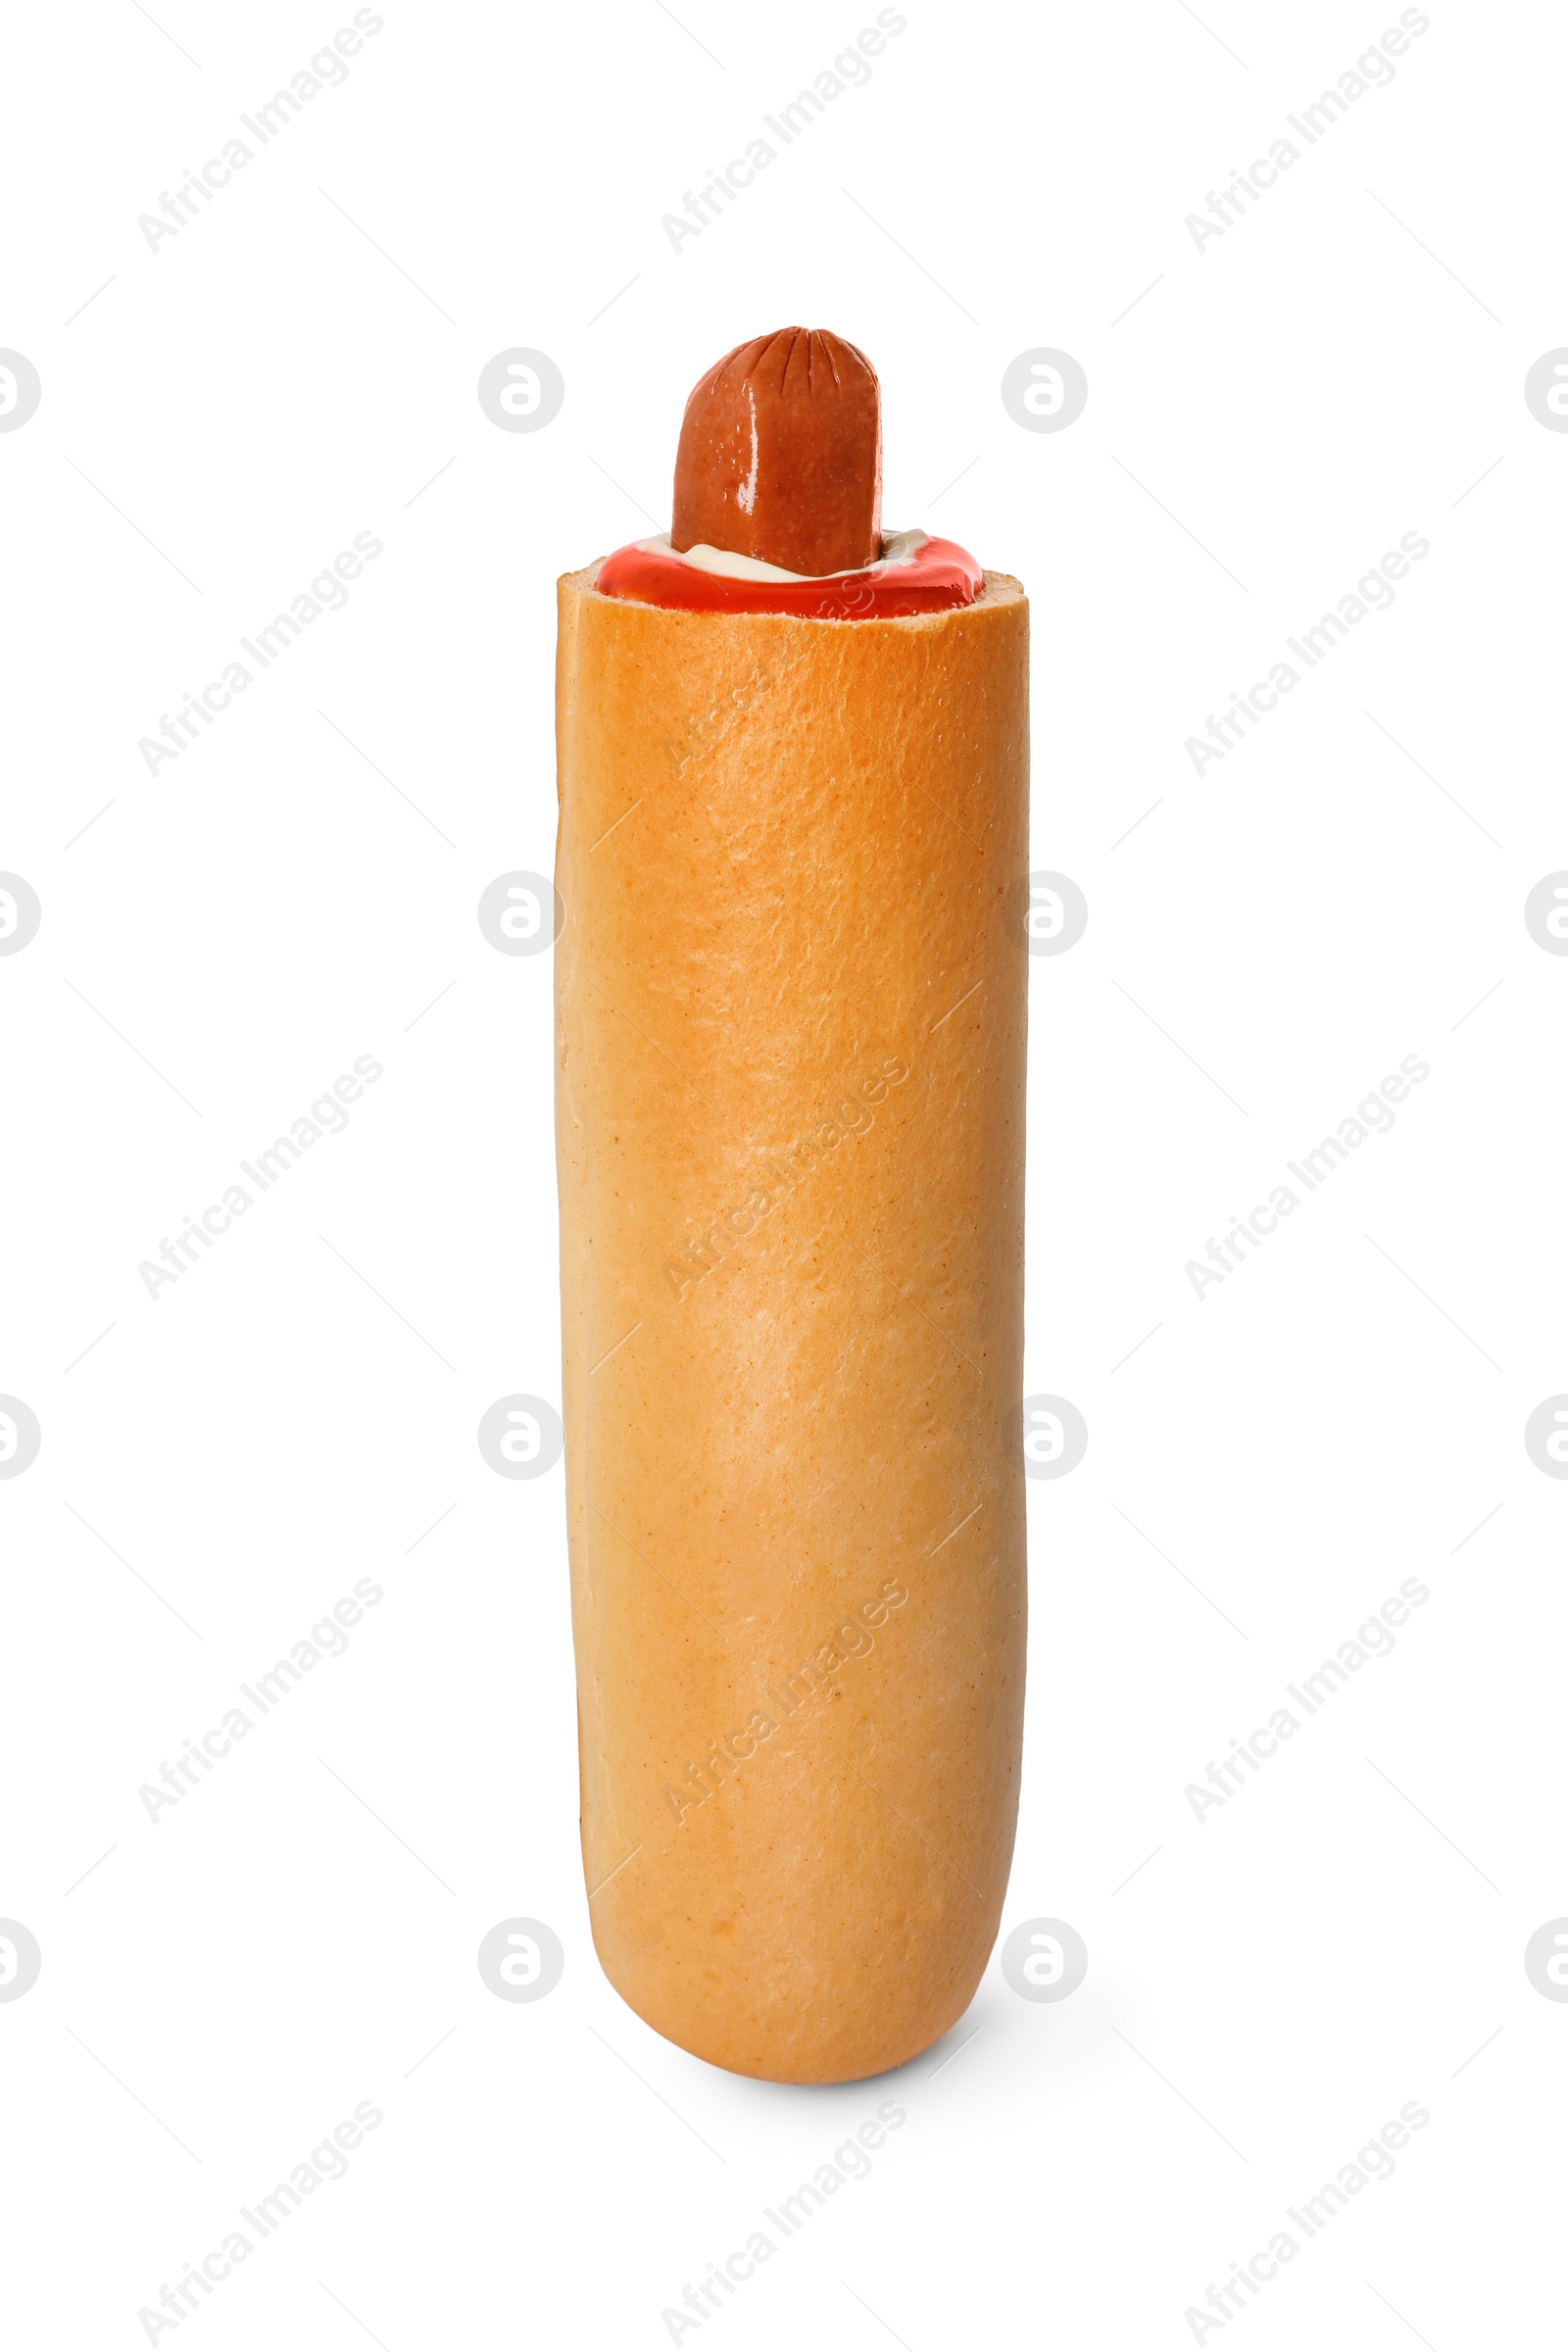 Photo of Tasty french hot dog with sauce isolated on white